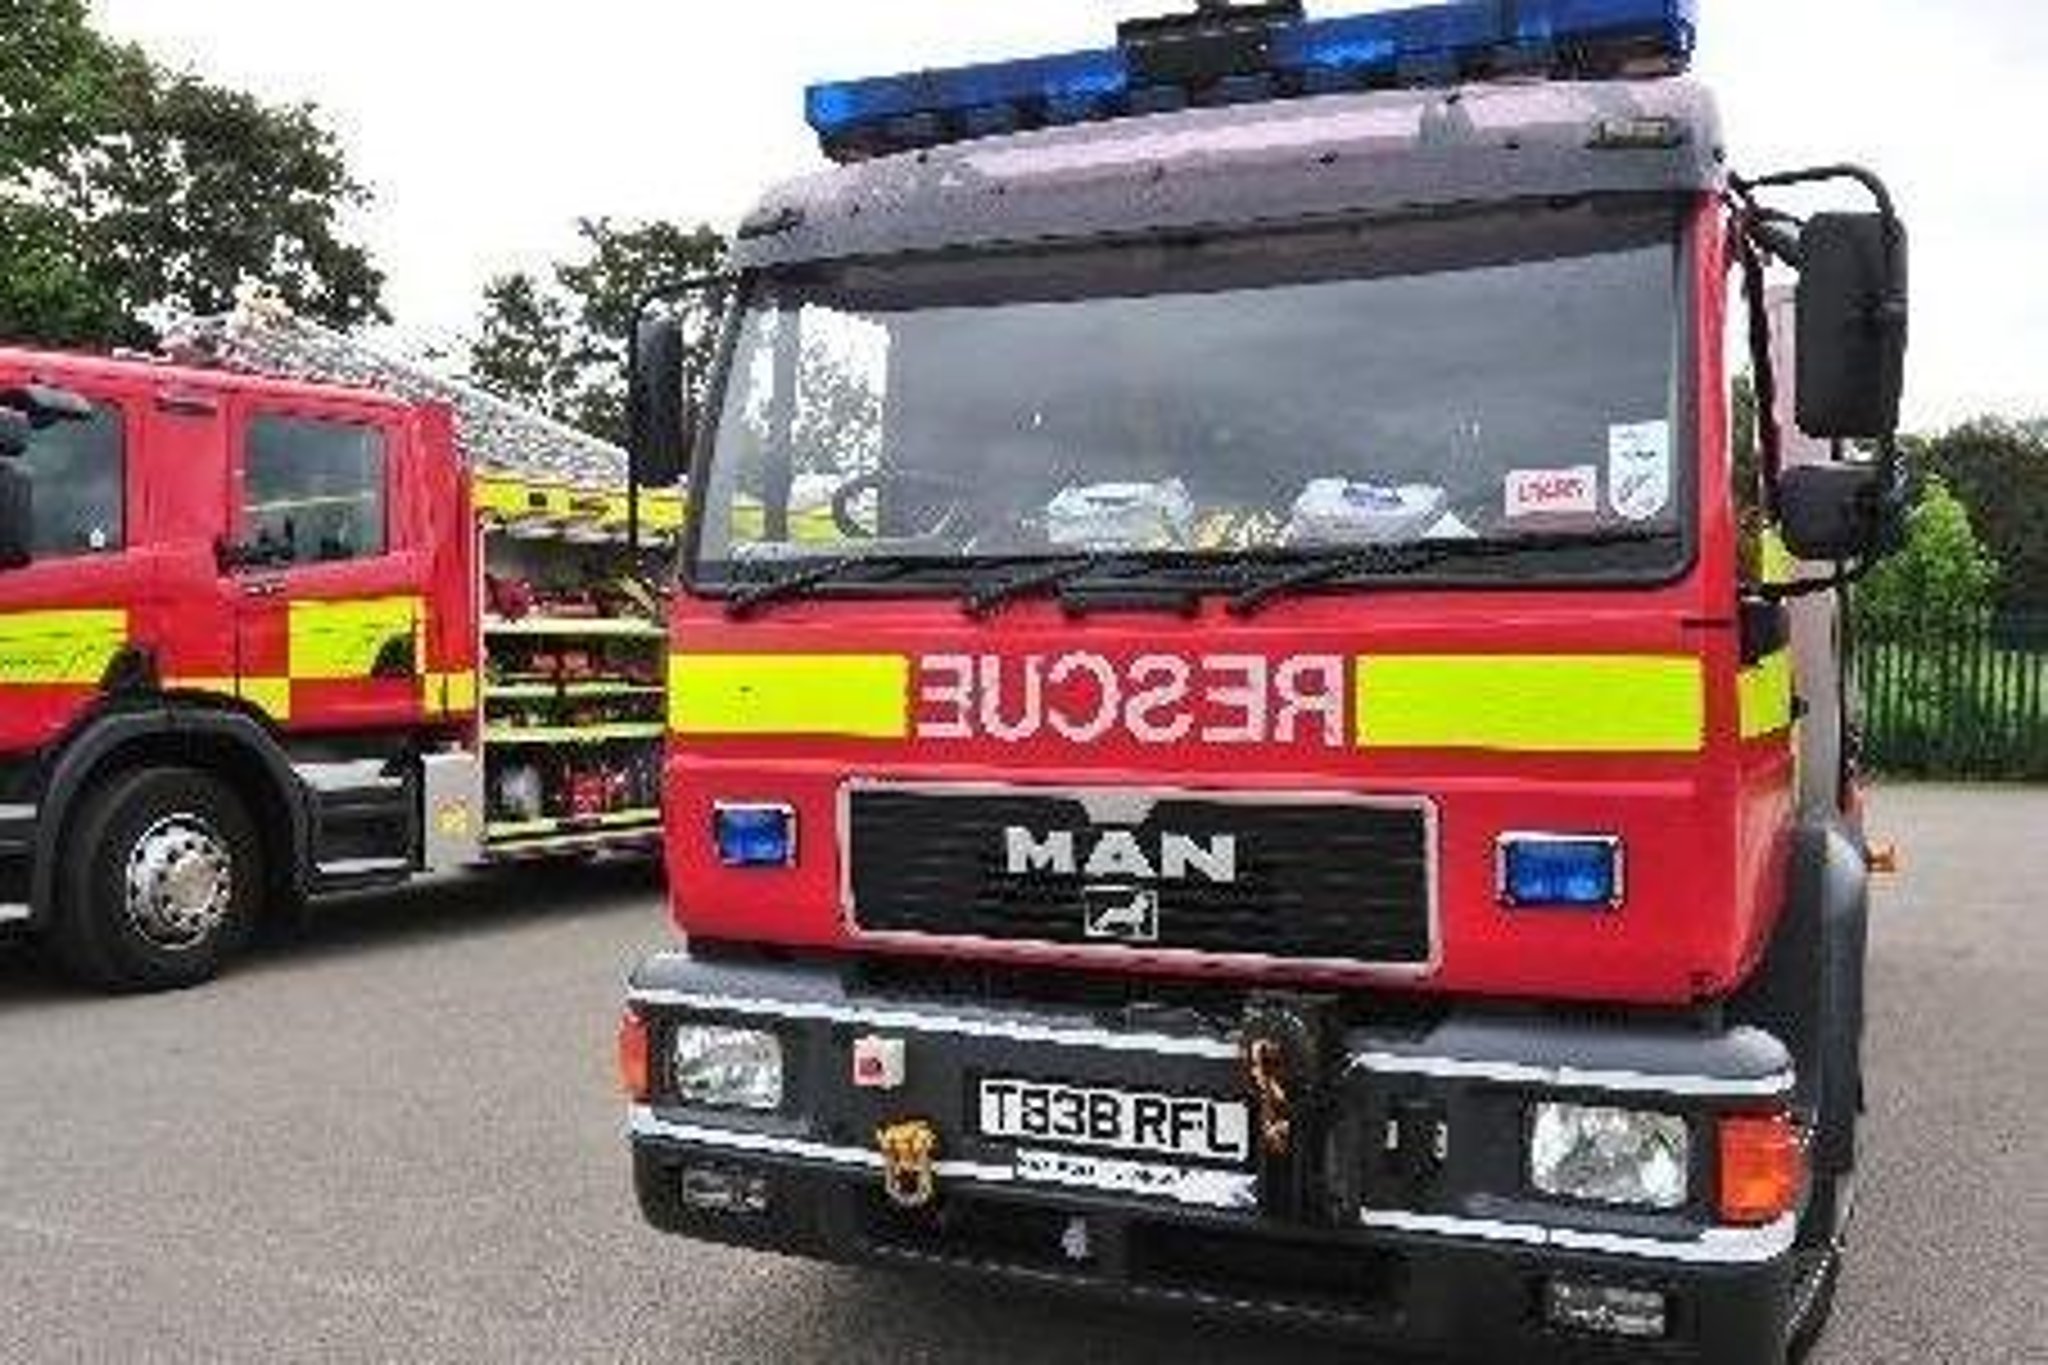 Large fire of 'hazardous materials' brought under control in early hours